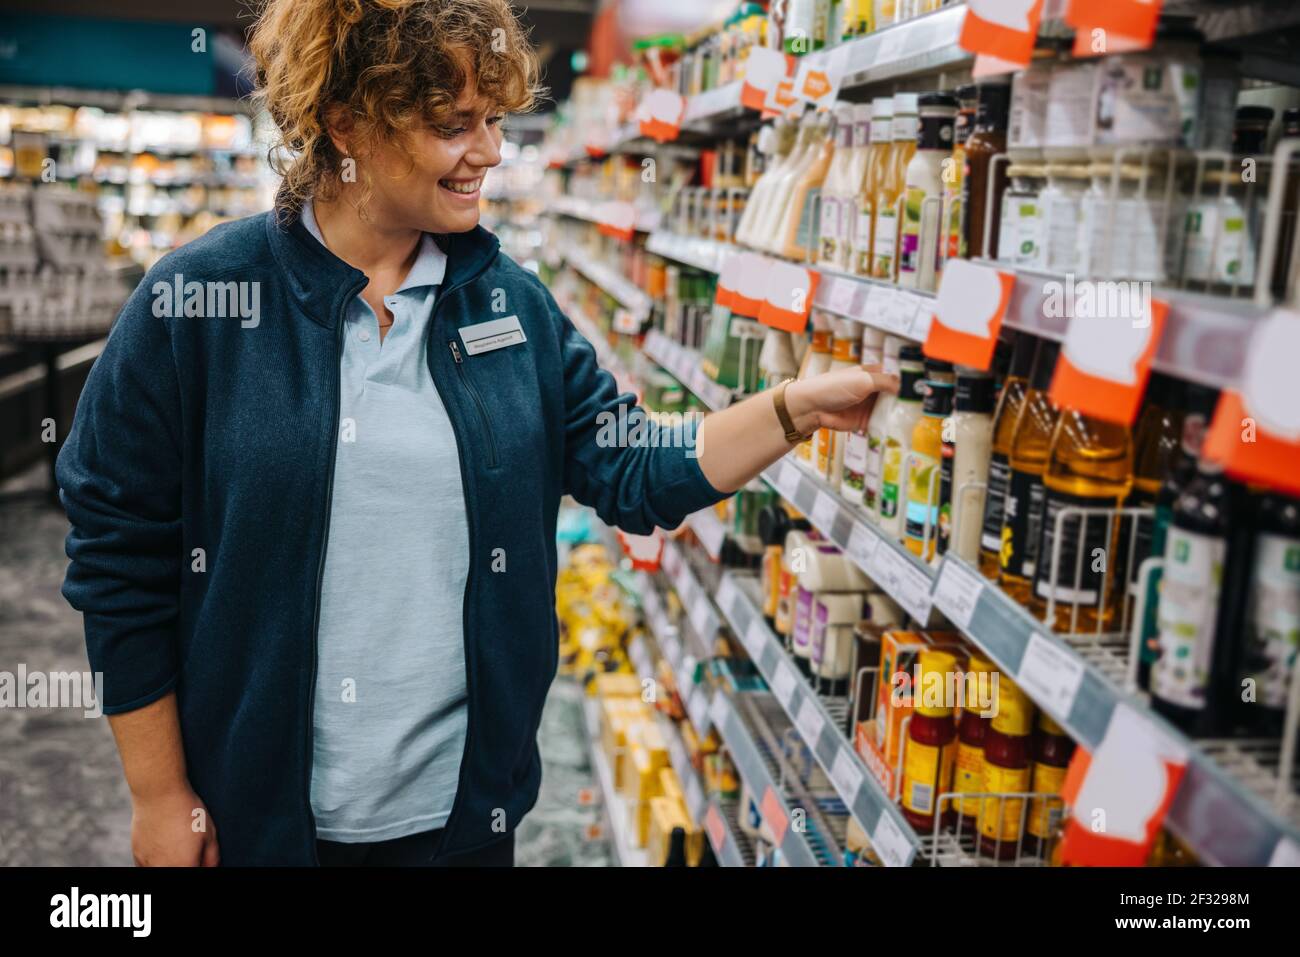 Woman working in supermarket. Female employee arranging the products correctly on the rack and smiling. Stock Photo